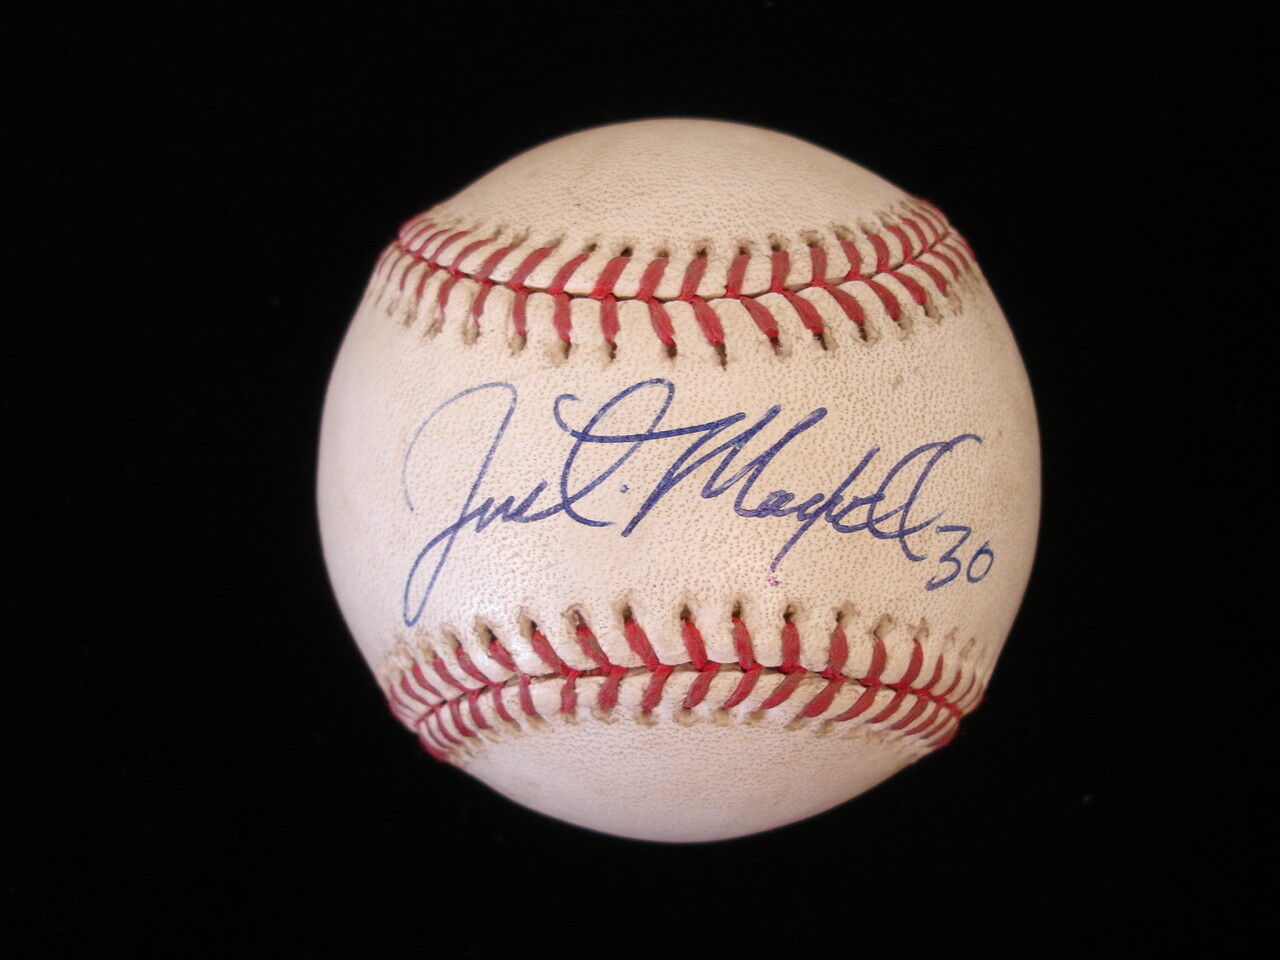 Justin Maxwell Autographed Game Used 2007 Brewers @ Marlins Baseball - MLB 